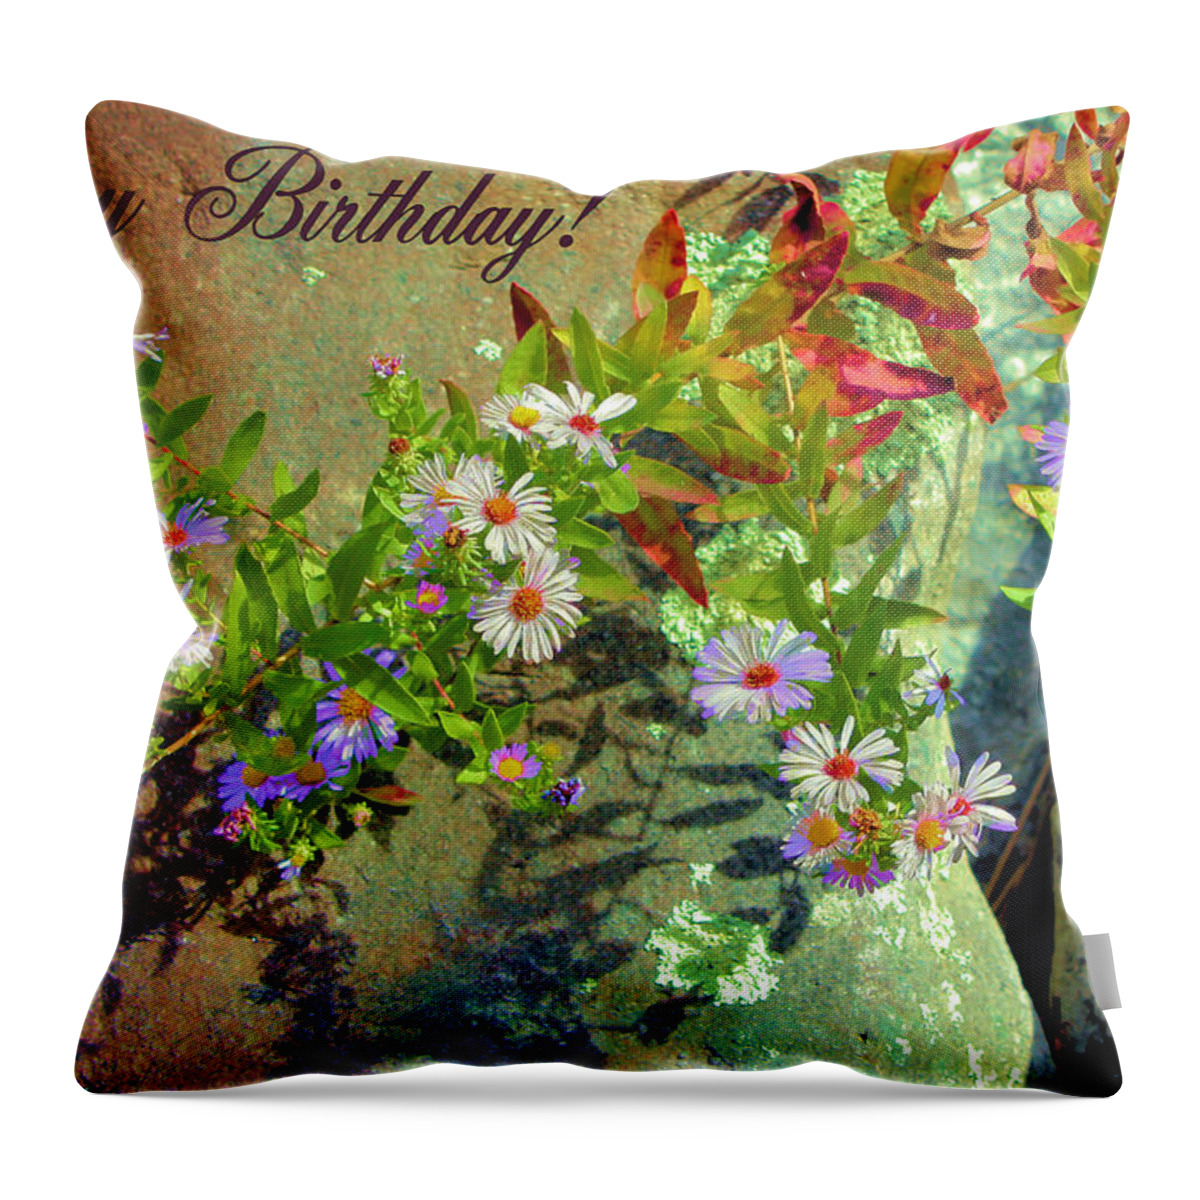 Happy Birthday Throw Pillow featuring the photograph September Birthday Aster by Kristin Elmquist